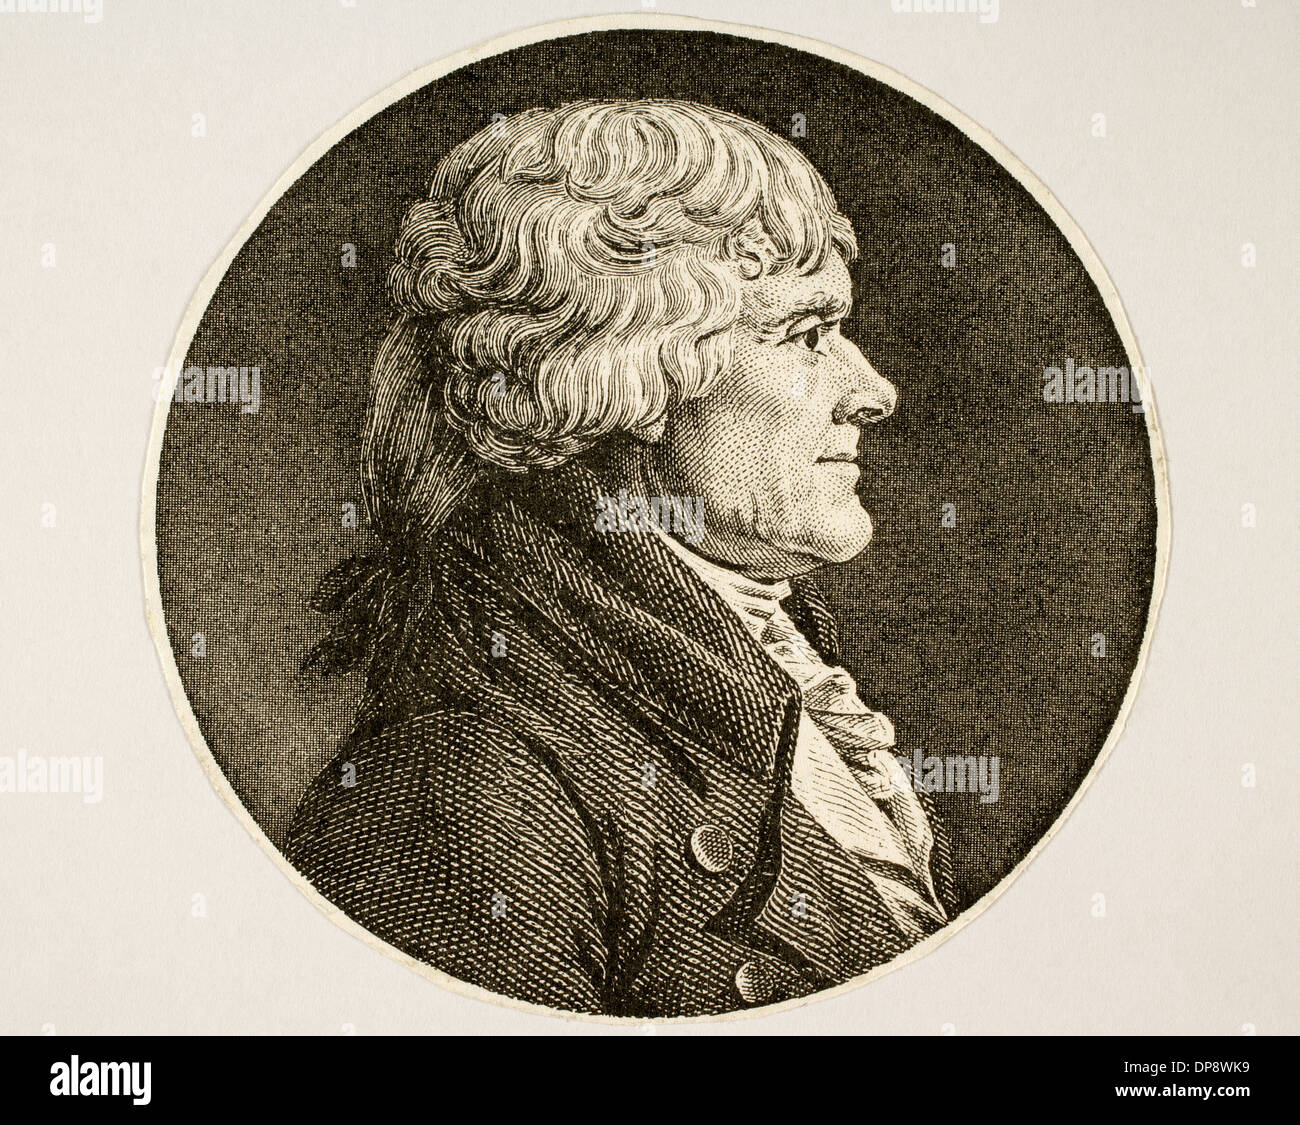 Thomas Jefferson (1743-1826). 3rd President and one of the Founding Fathers of the United States. Engraving. Stock Photo